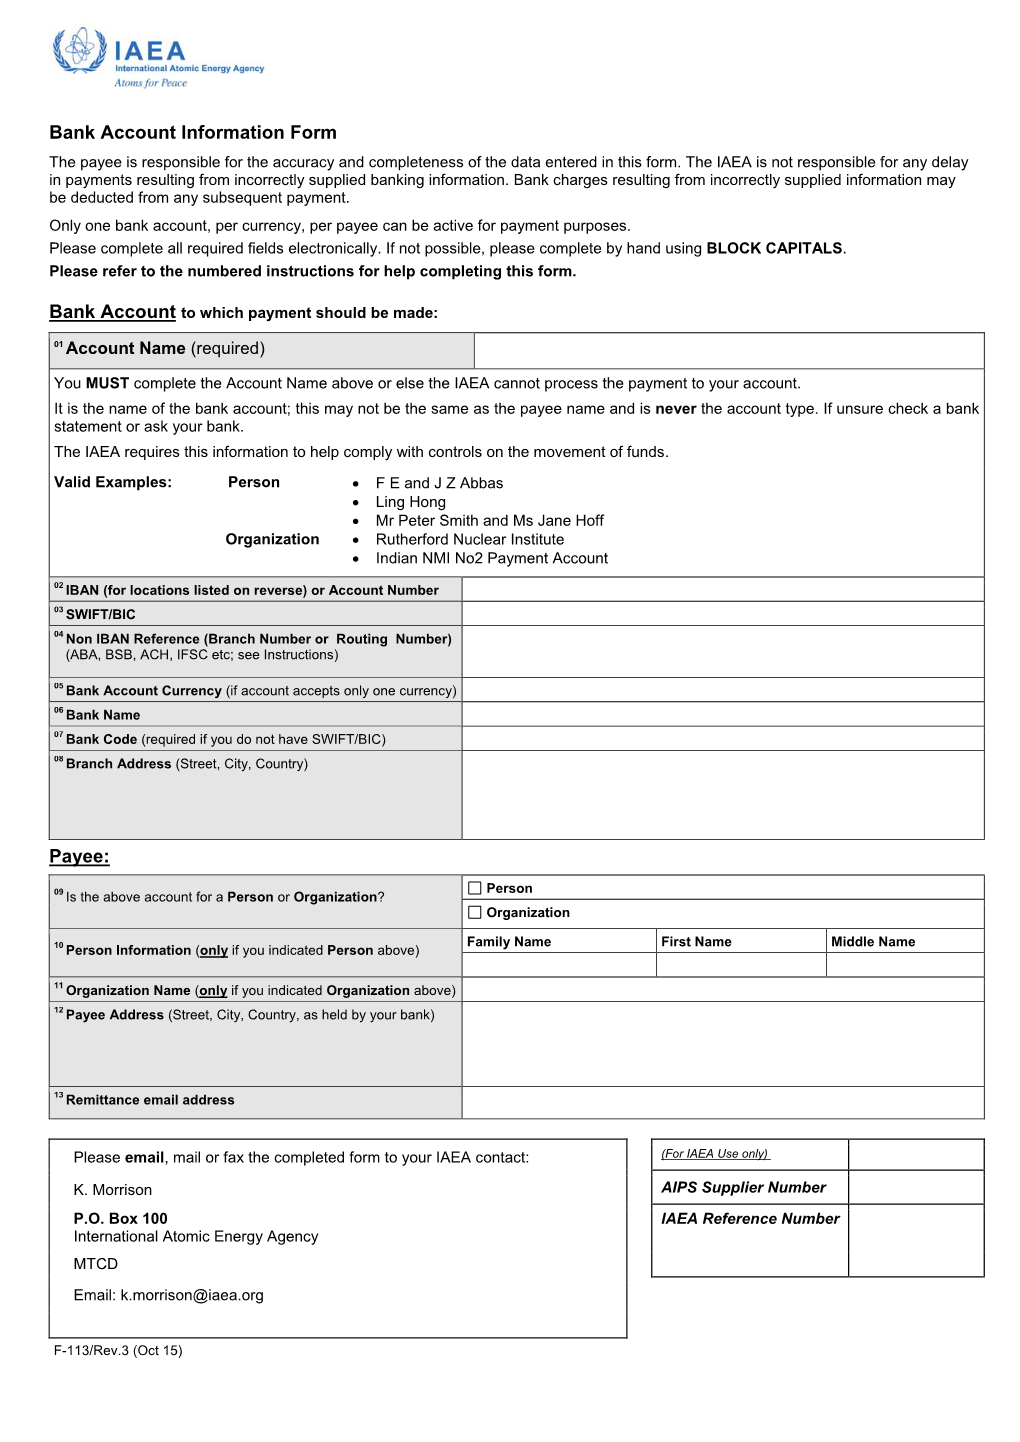 Bank Account Information Form Payee